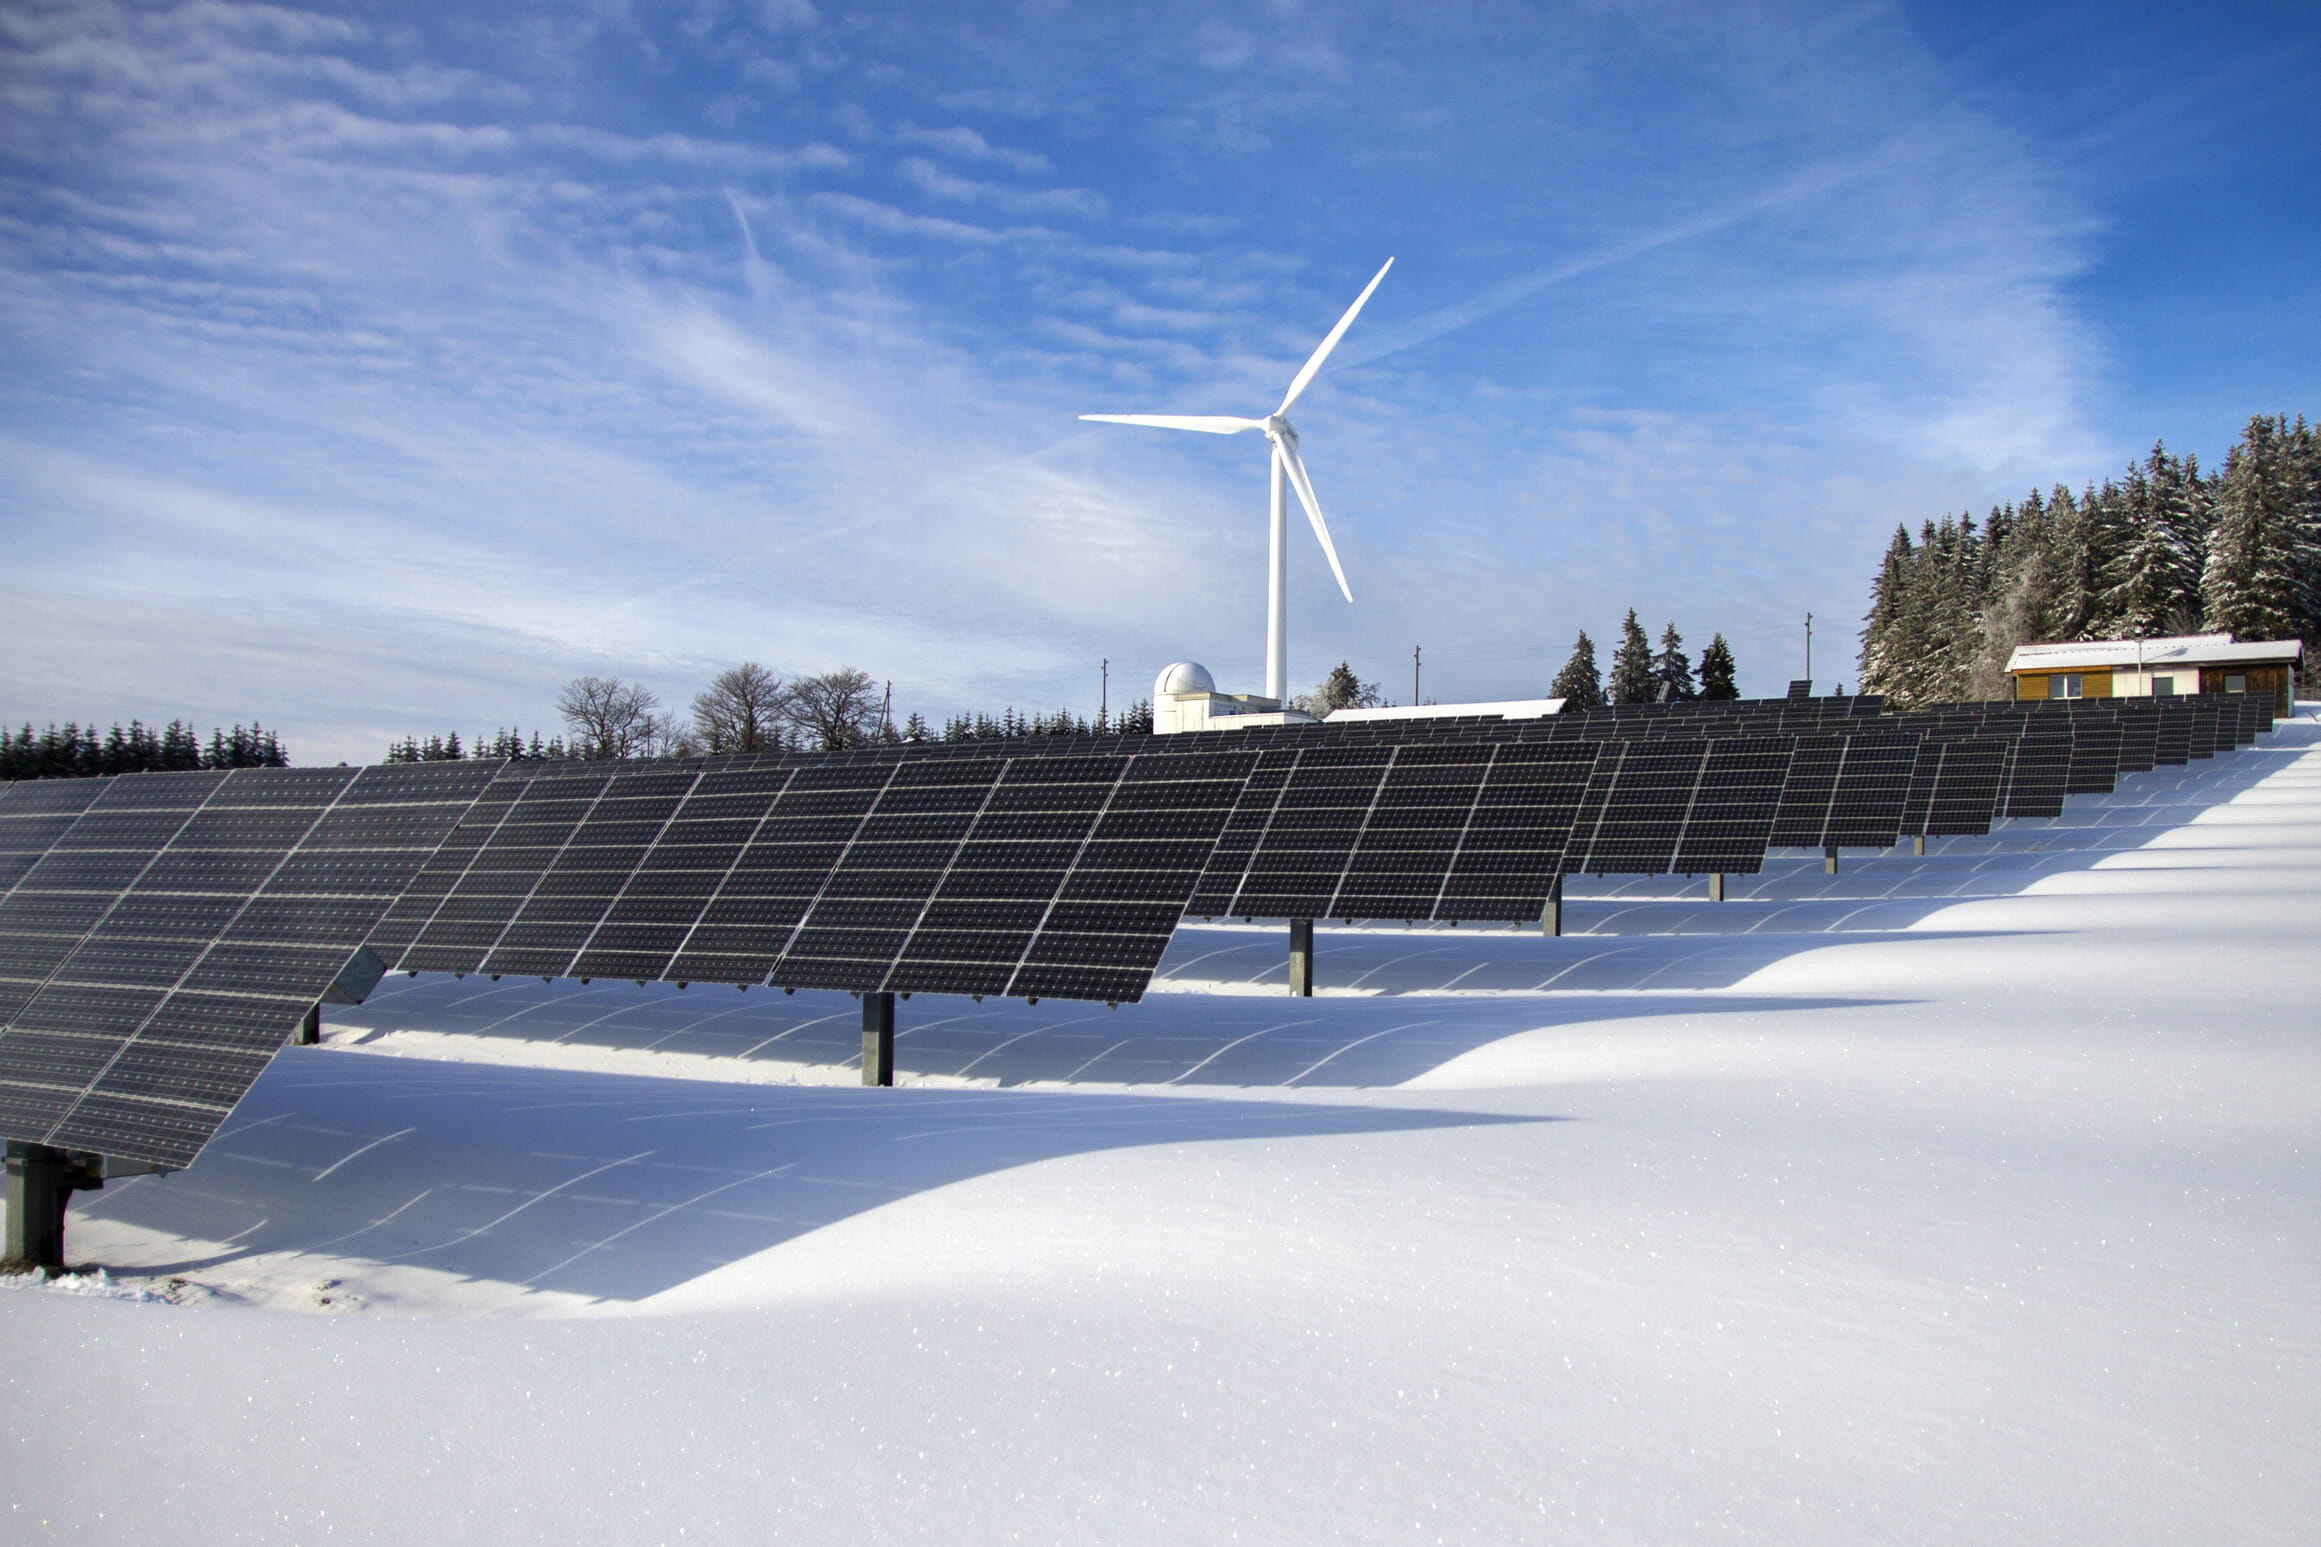 Solar panels in a snow-covered field with a wind turbine in the distance.